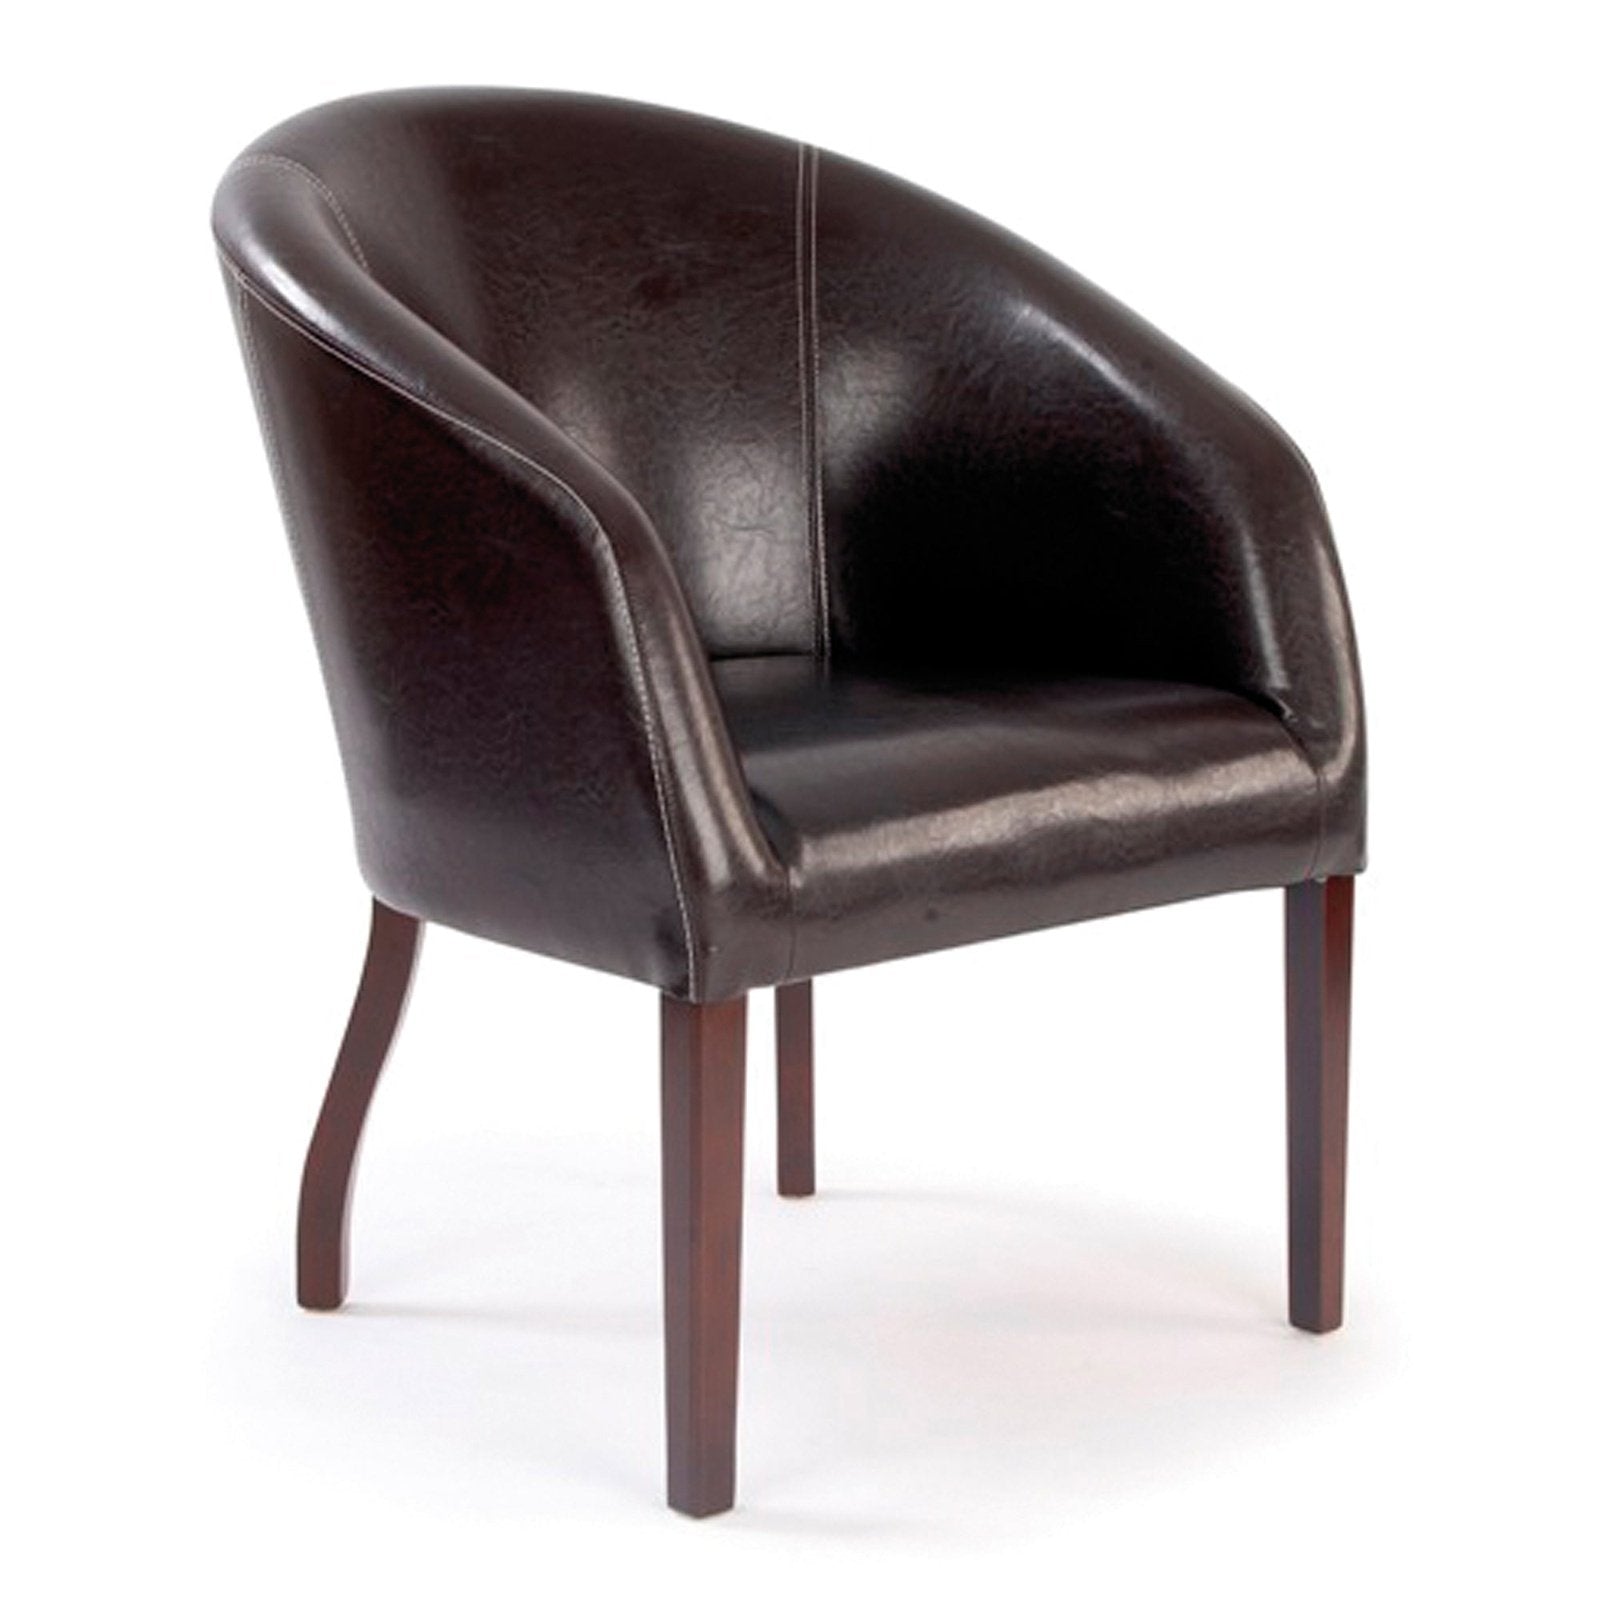 Modern Curved Armchair Upholstered in a Durable Leather Effect Finish - Brown - Office Products Online